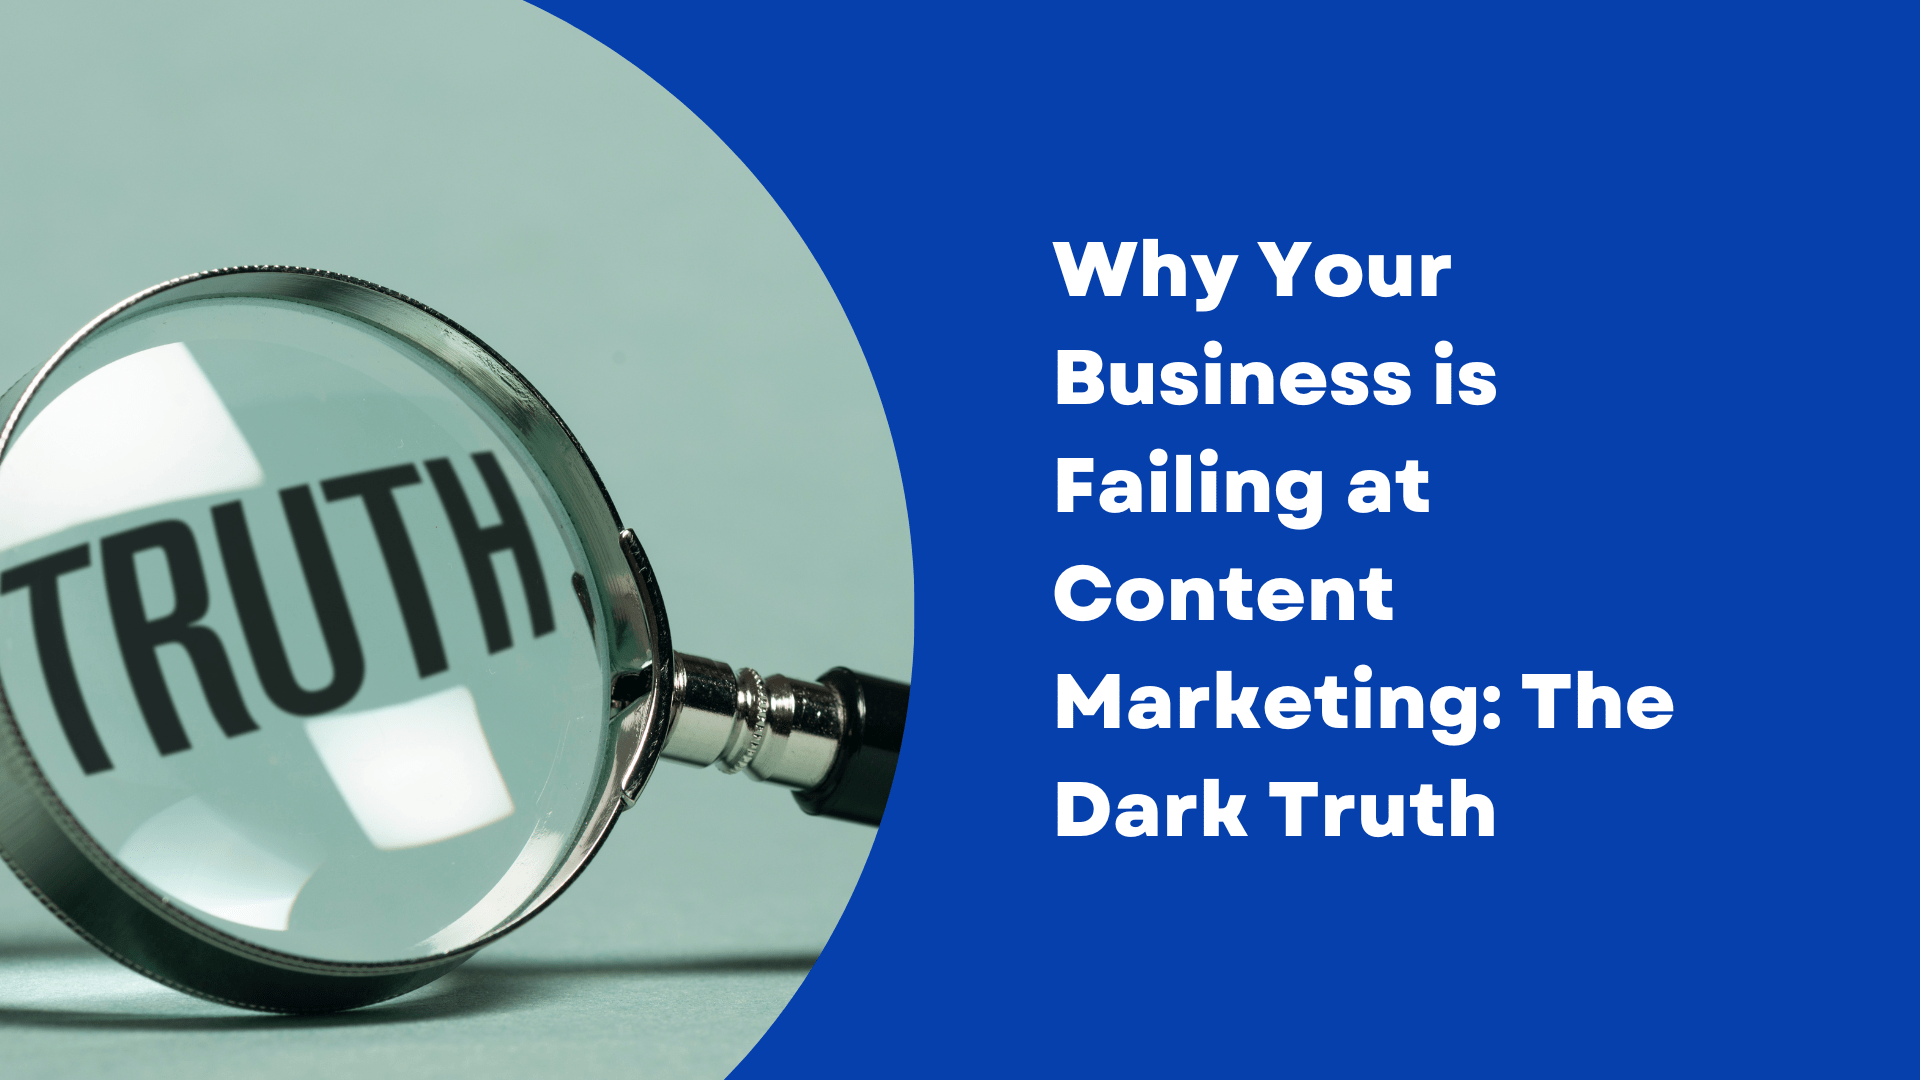 Why Your Business is Failing at Content Marketing: The Dark Truth